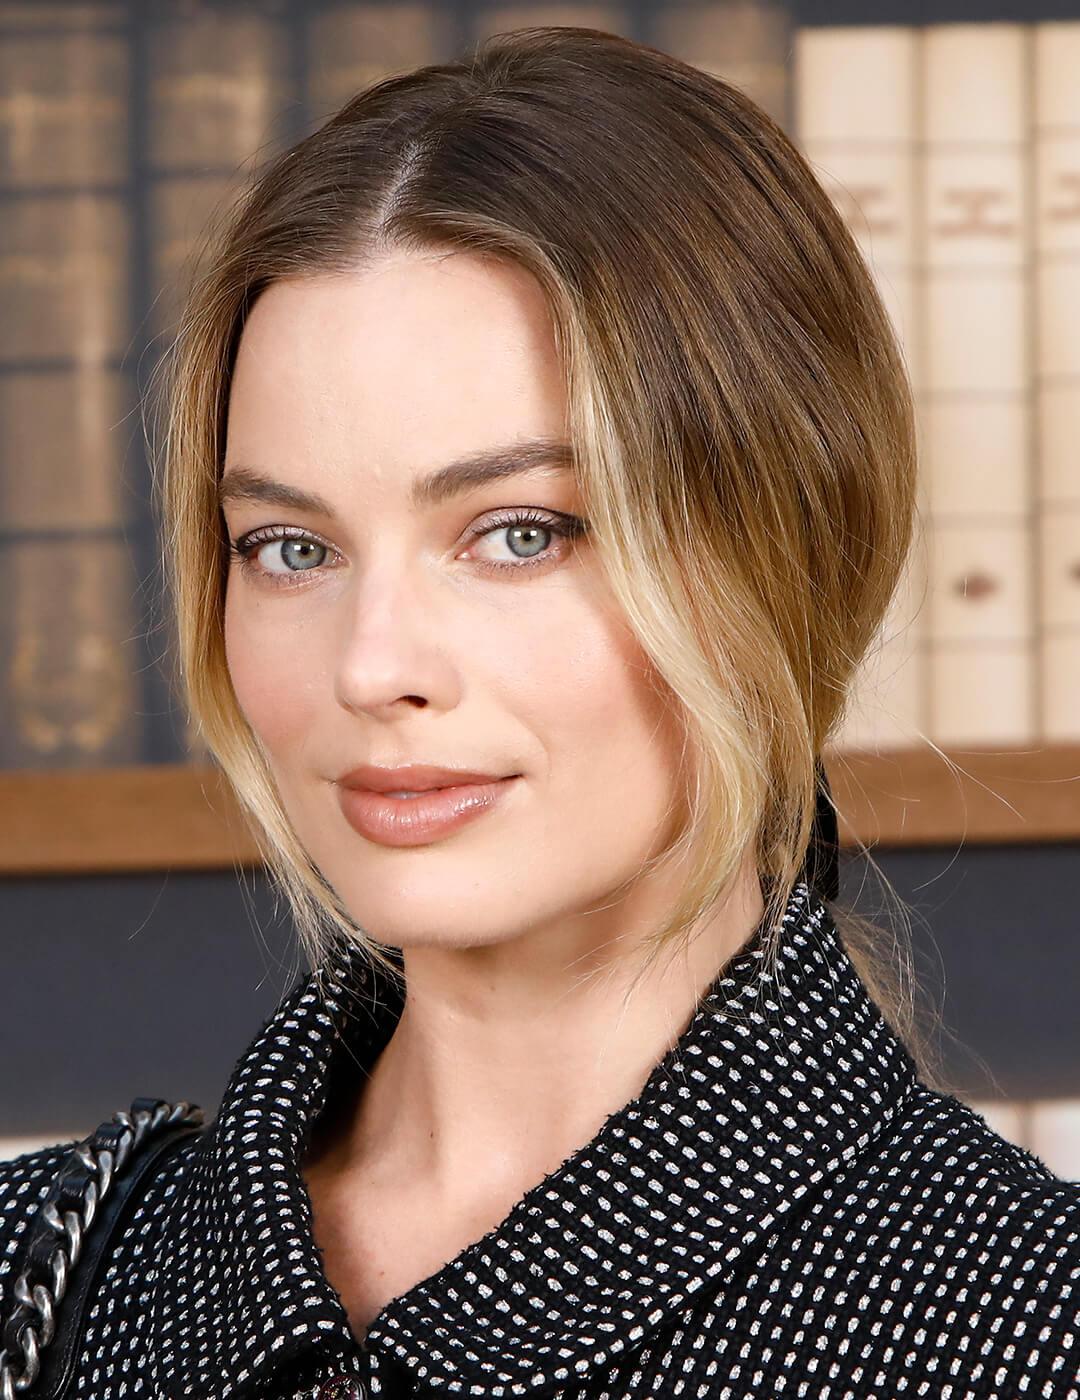 Margot Robbie rocking a black and white tweed coat and low ponytail hairstyle with loose bangs